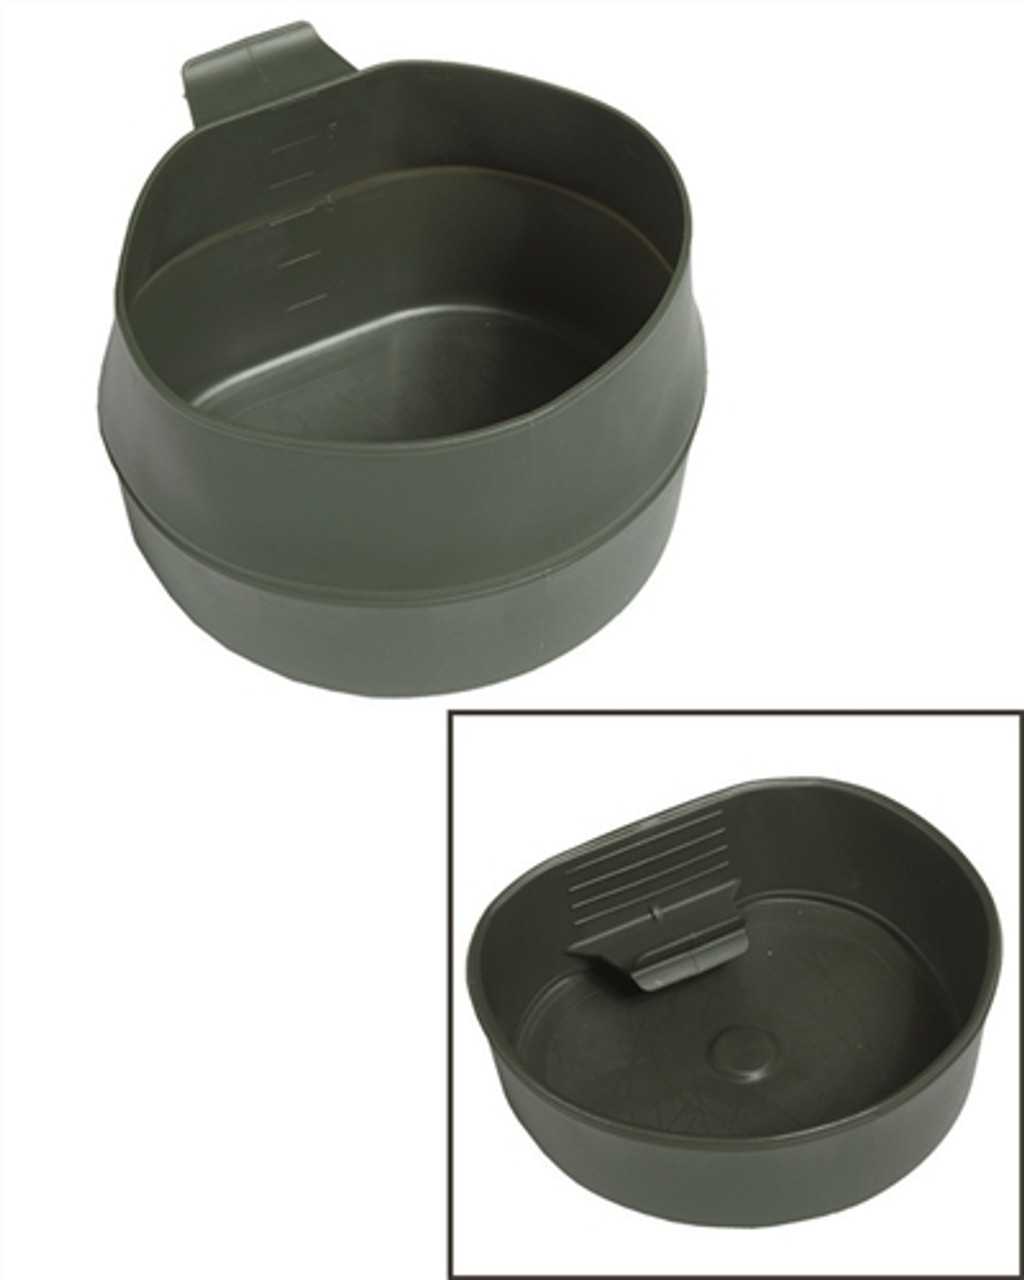 OD FOLD-A-CUP® COLLAPSIBLE CUP - 200 ML from Hessen Antique